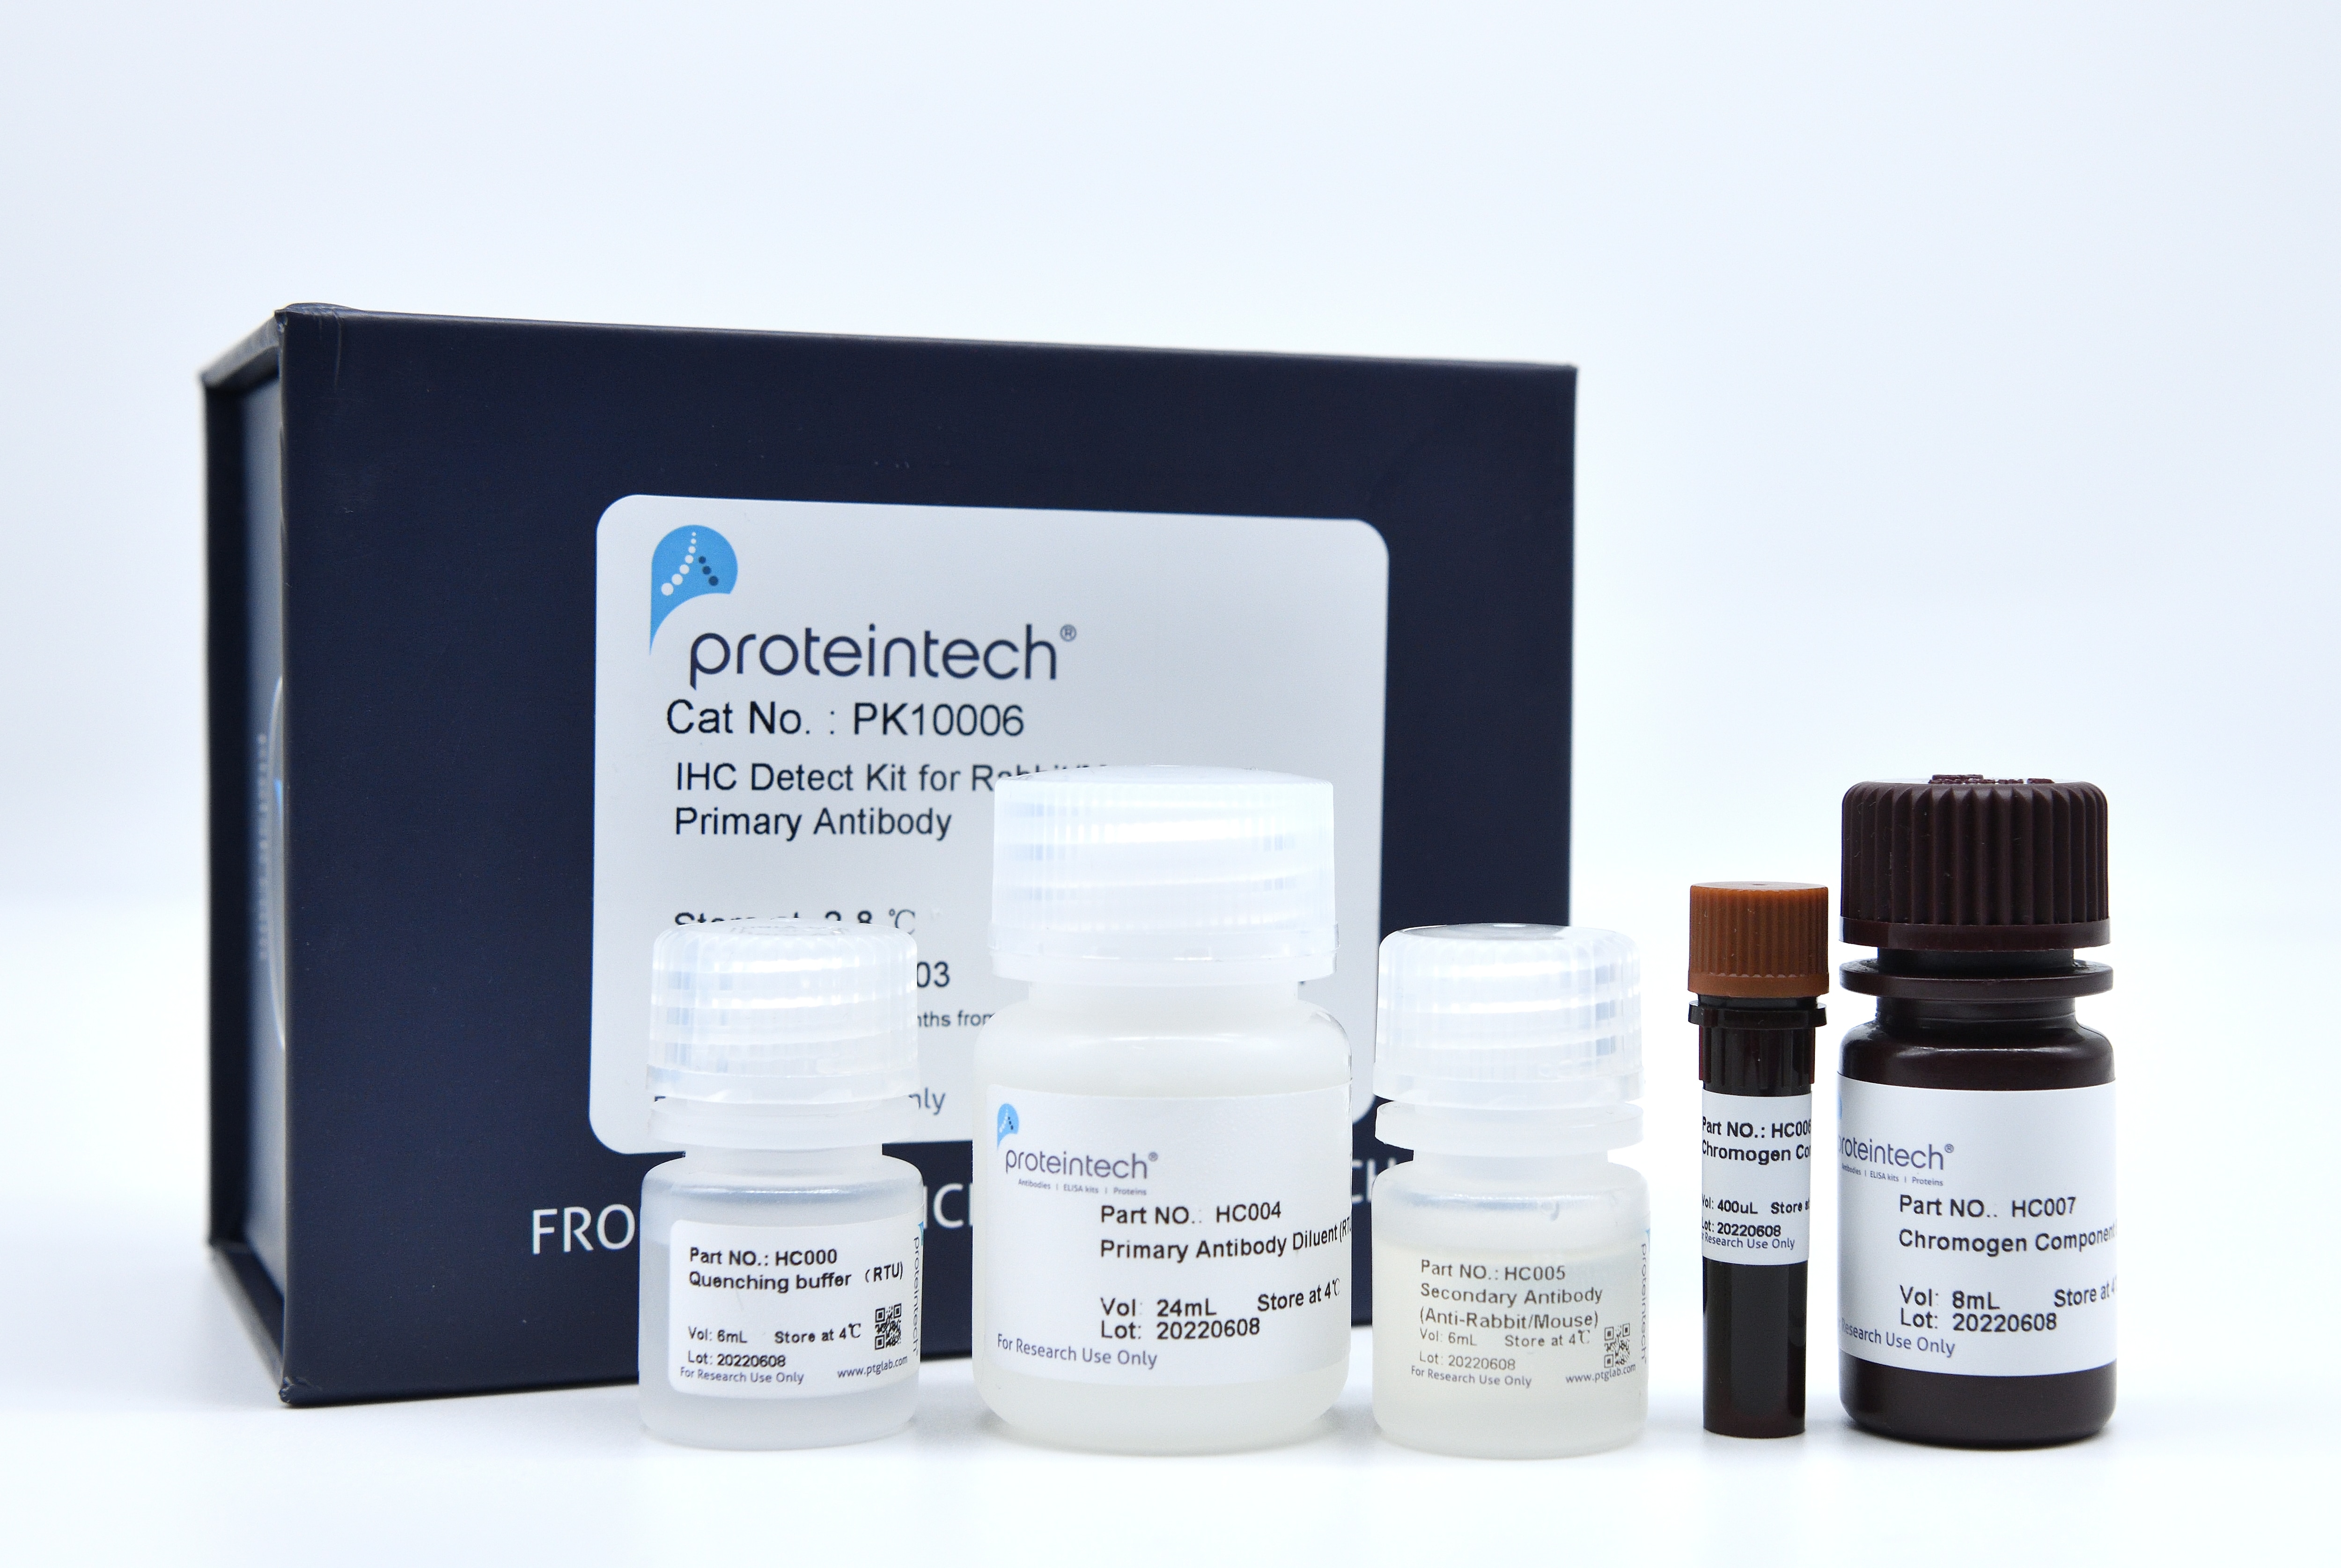 Proteintech IHC detect kit product image